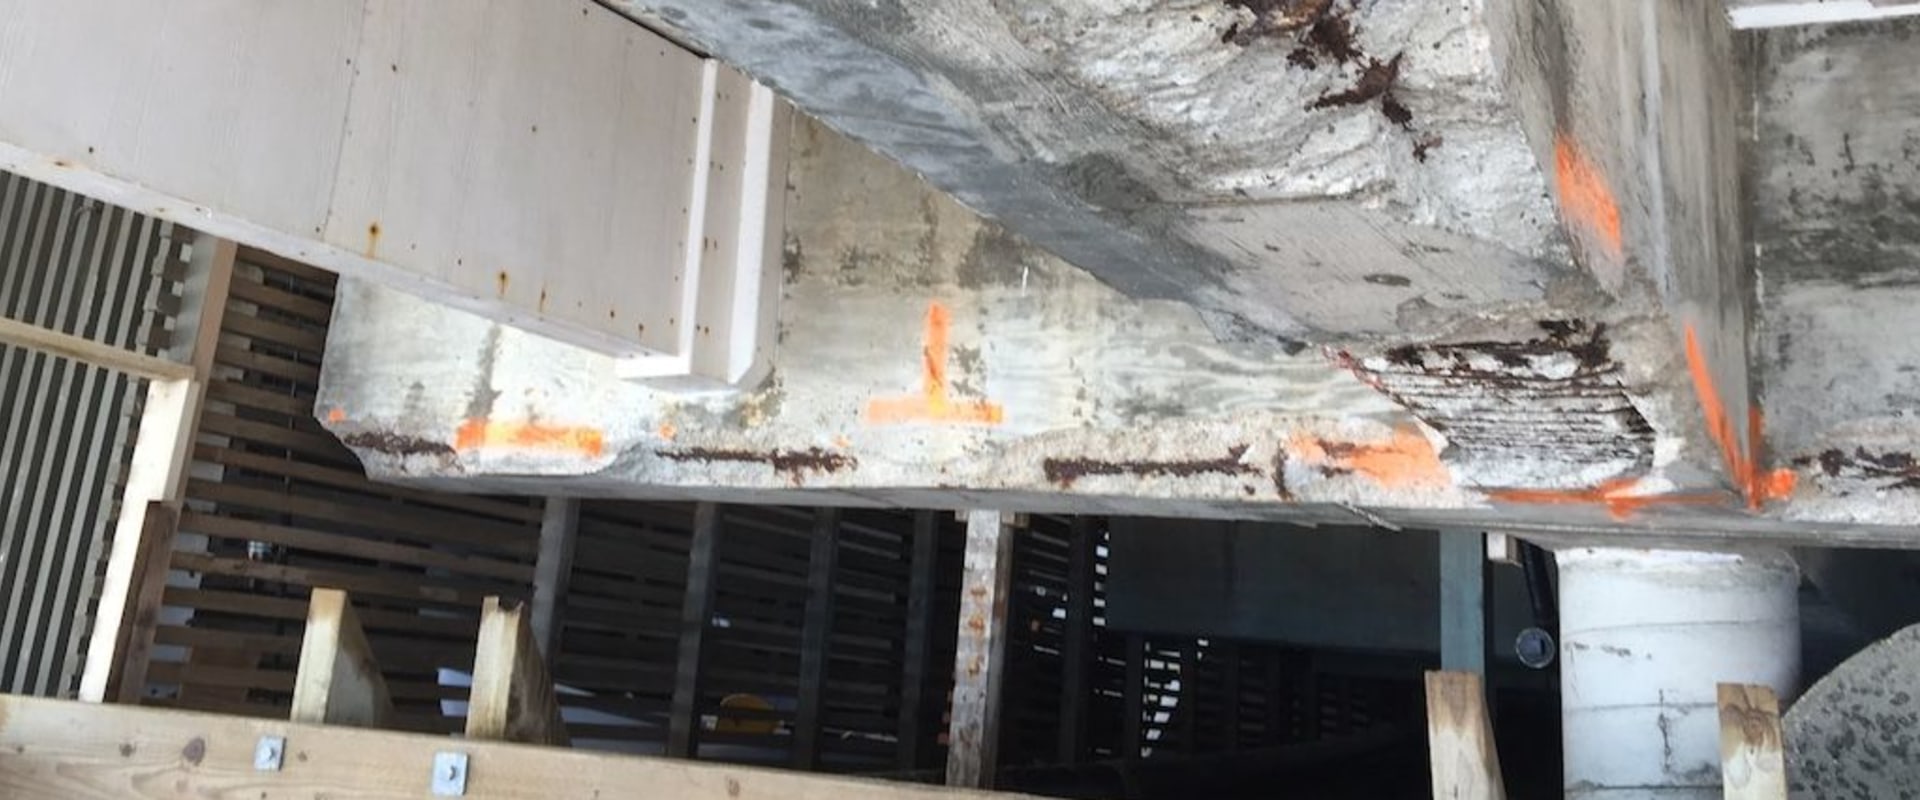 How do you fix deep spalling in concrete?